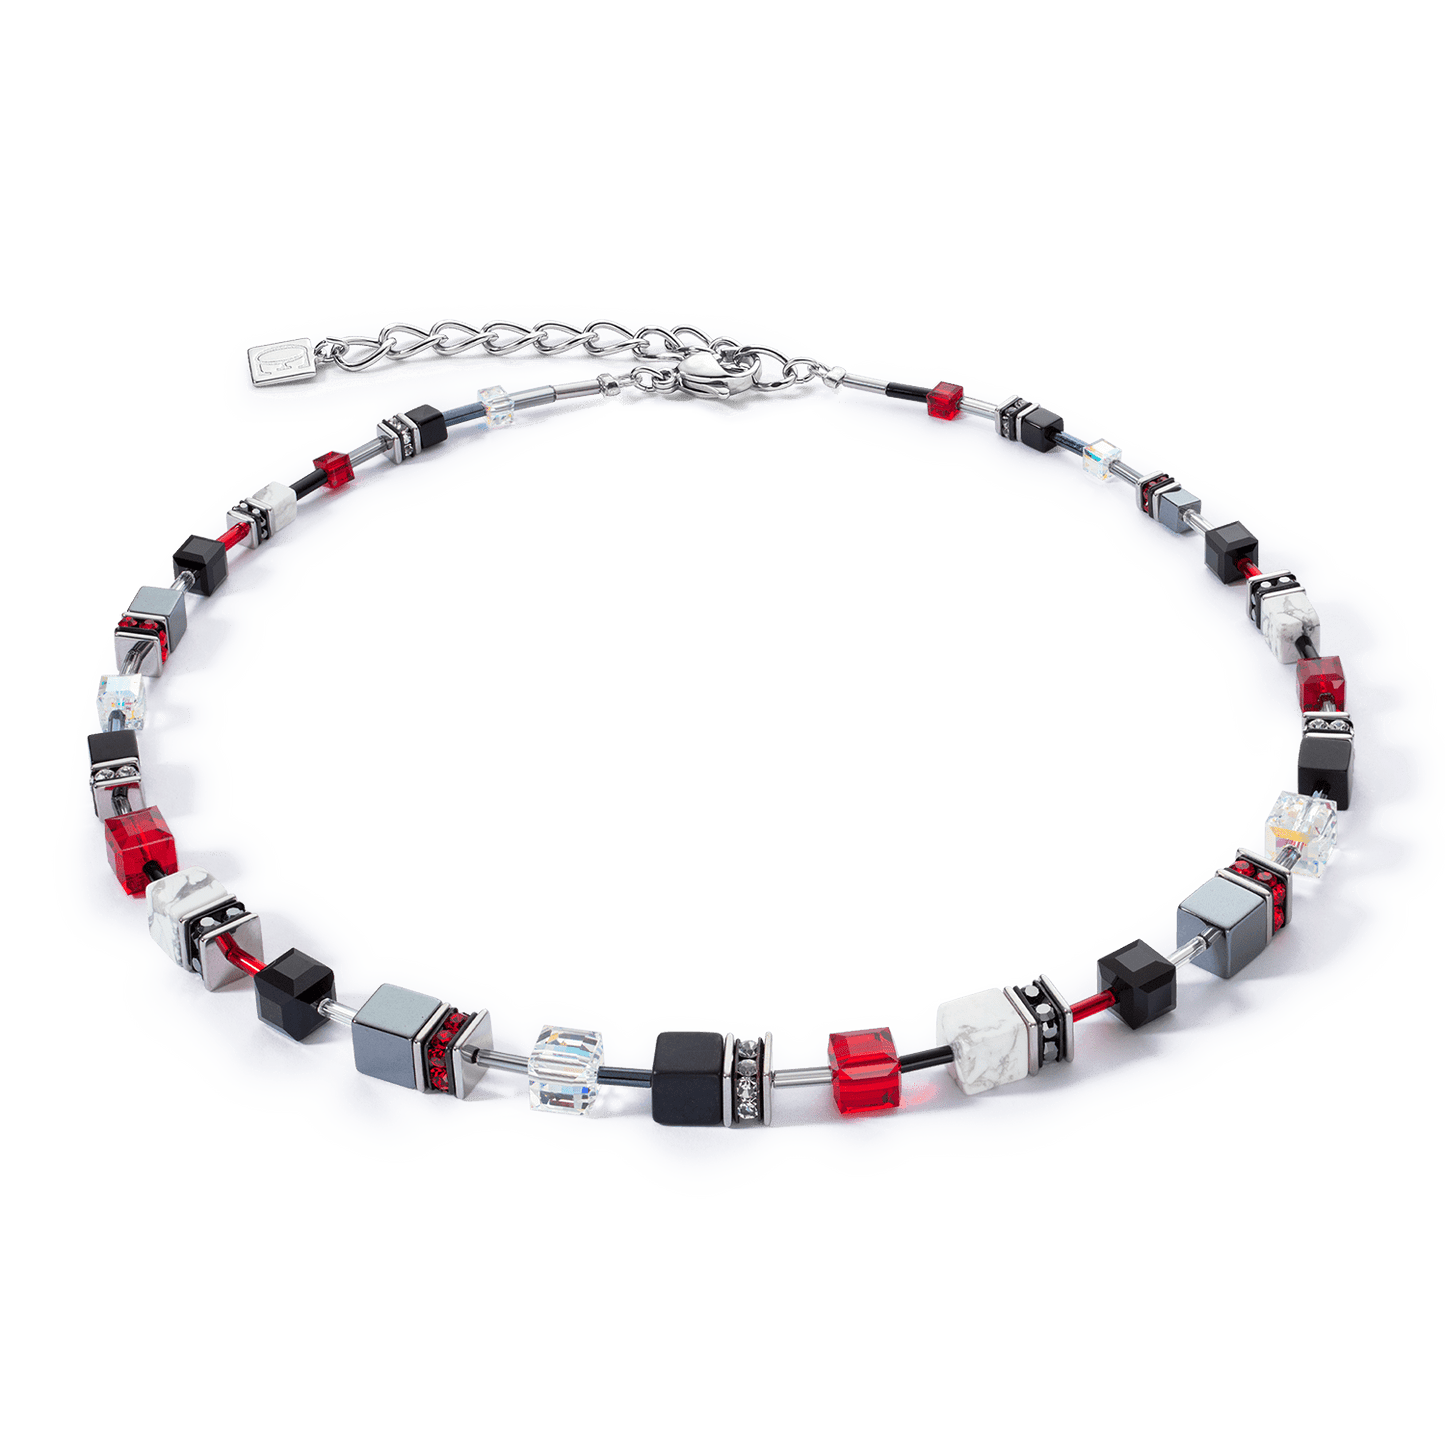 NKL Black and Red GeoCube Necklace